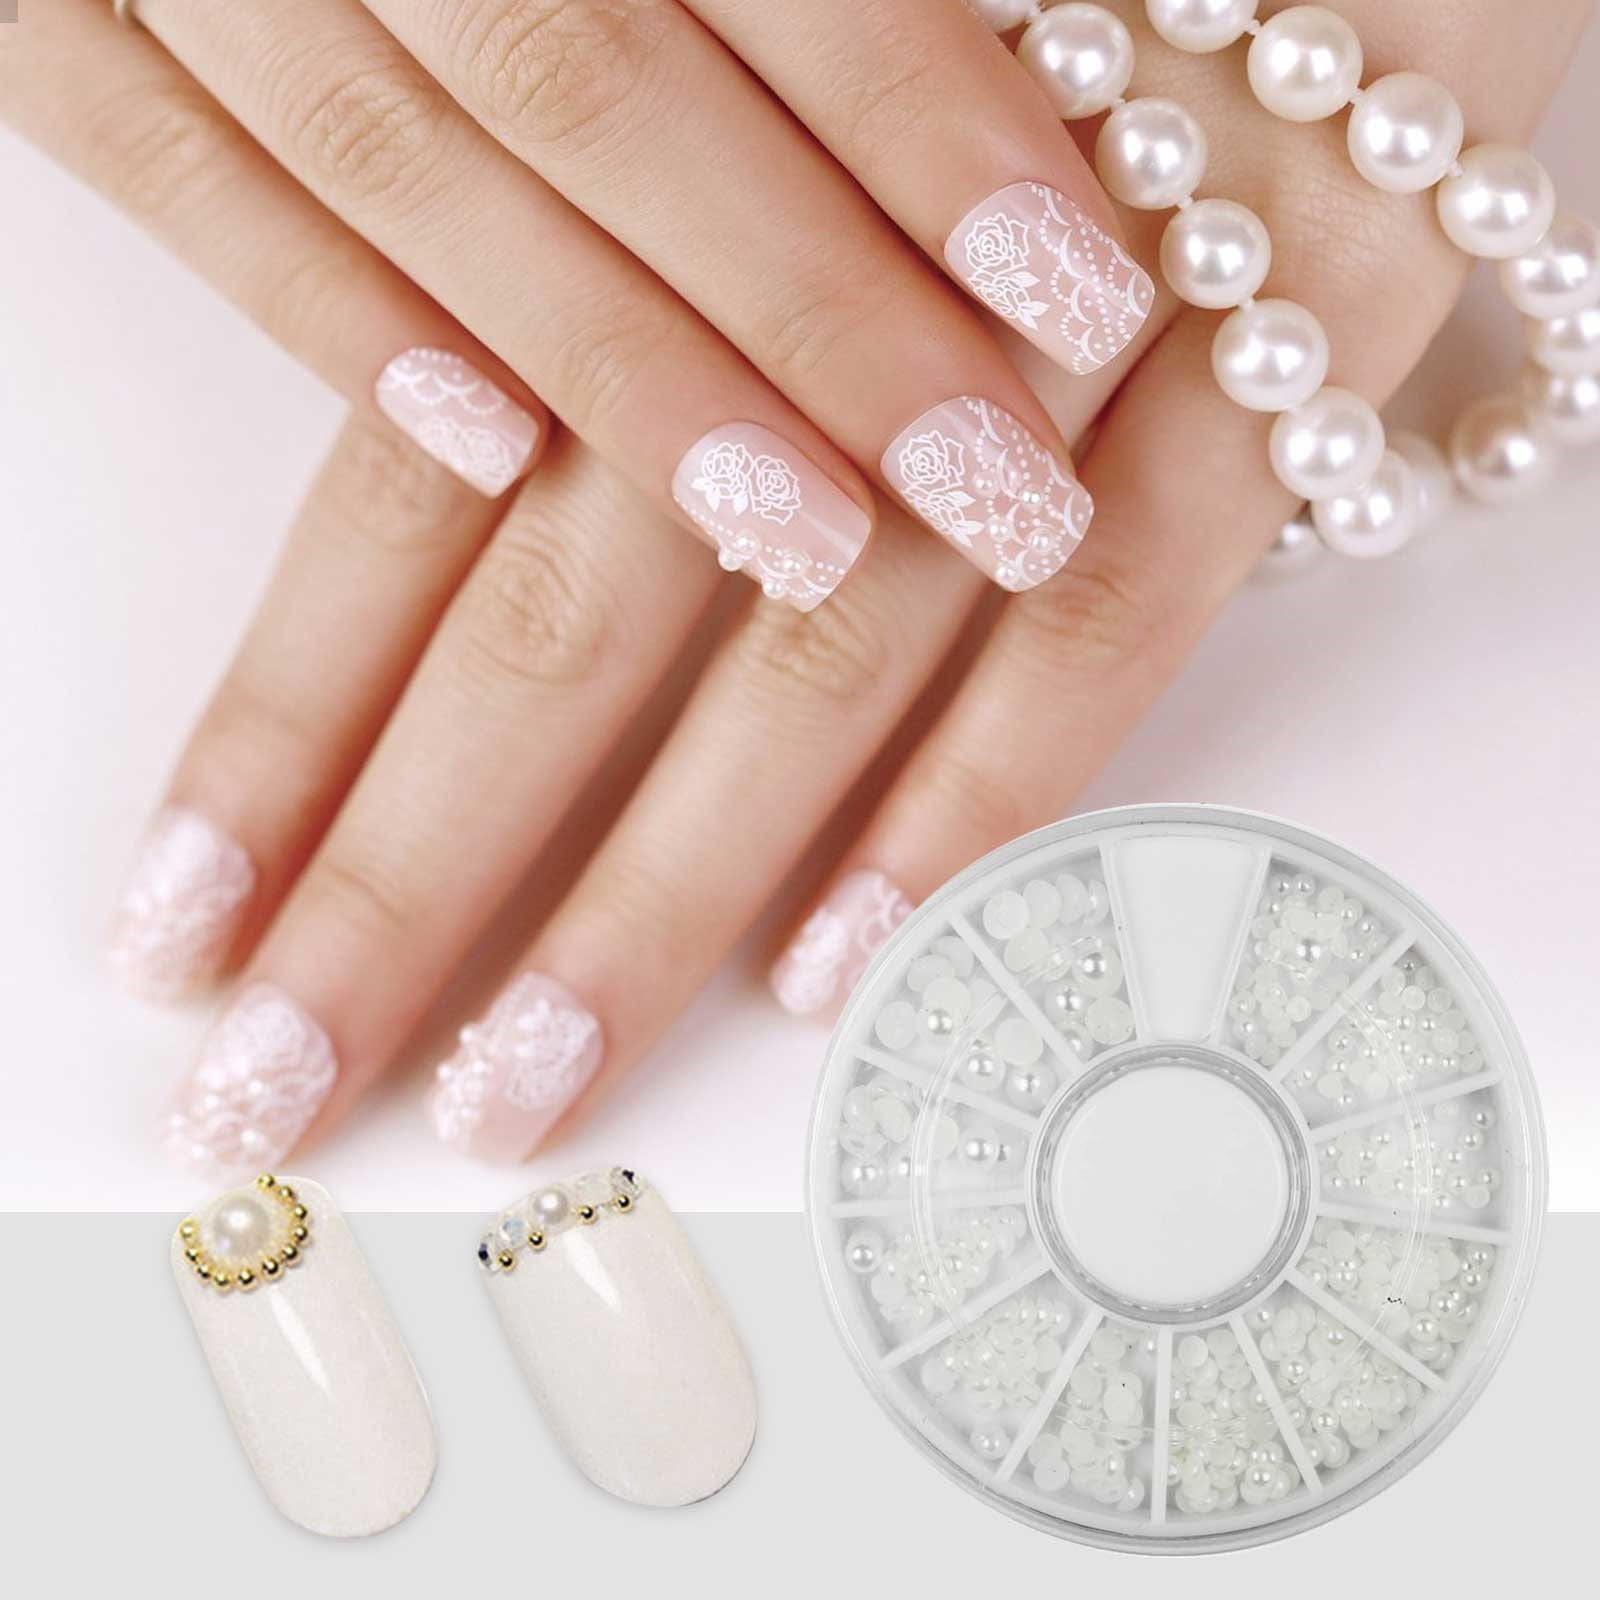 3D Flower Nail Charms, 12Colors 3D Acrylic Flower Nail Rhinestones with  Gold Silver Pearl Caviar Beads Spring Small Flores Nail Art Design for DIY